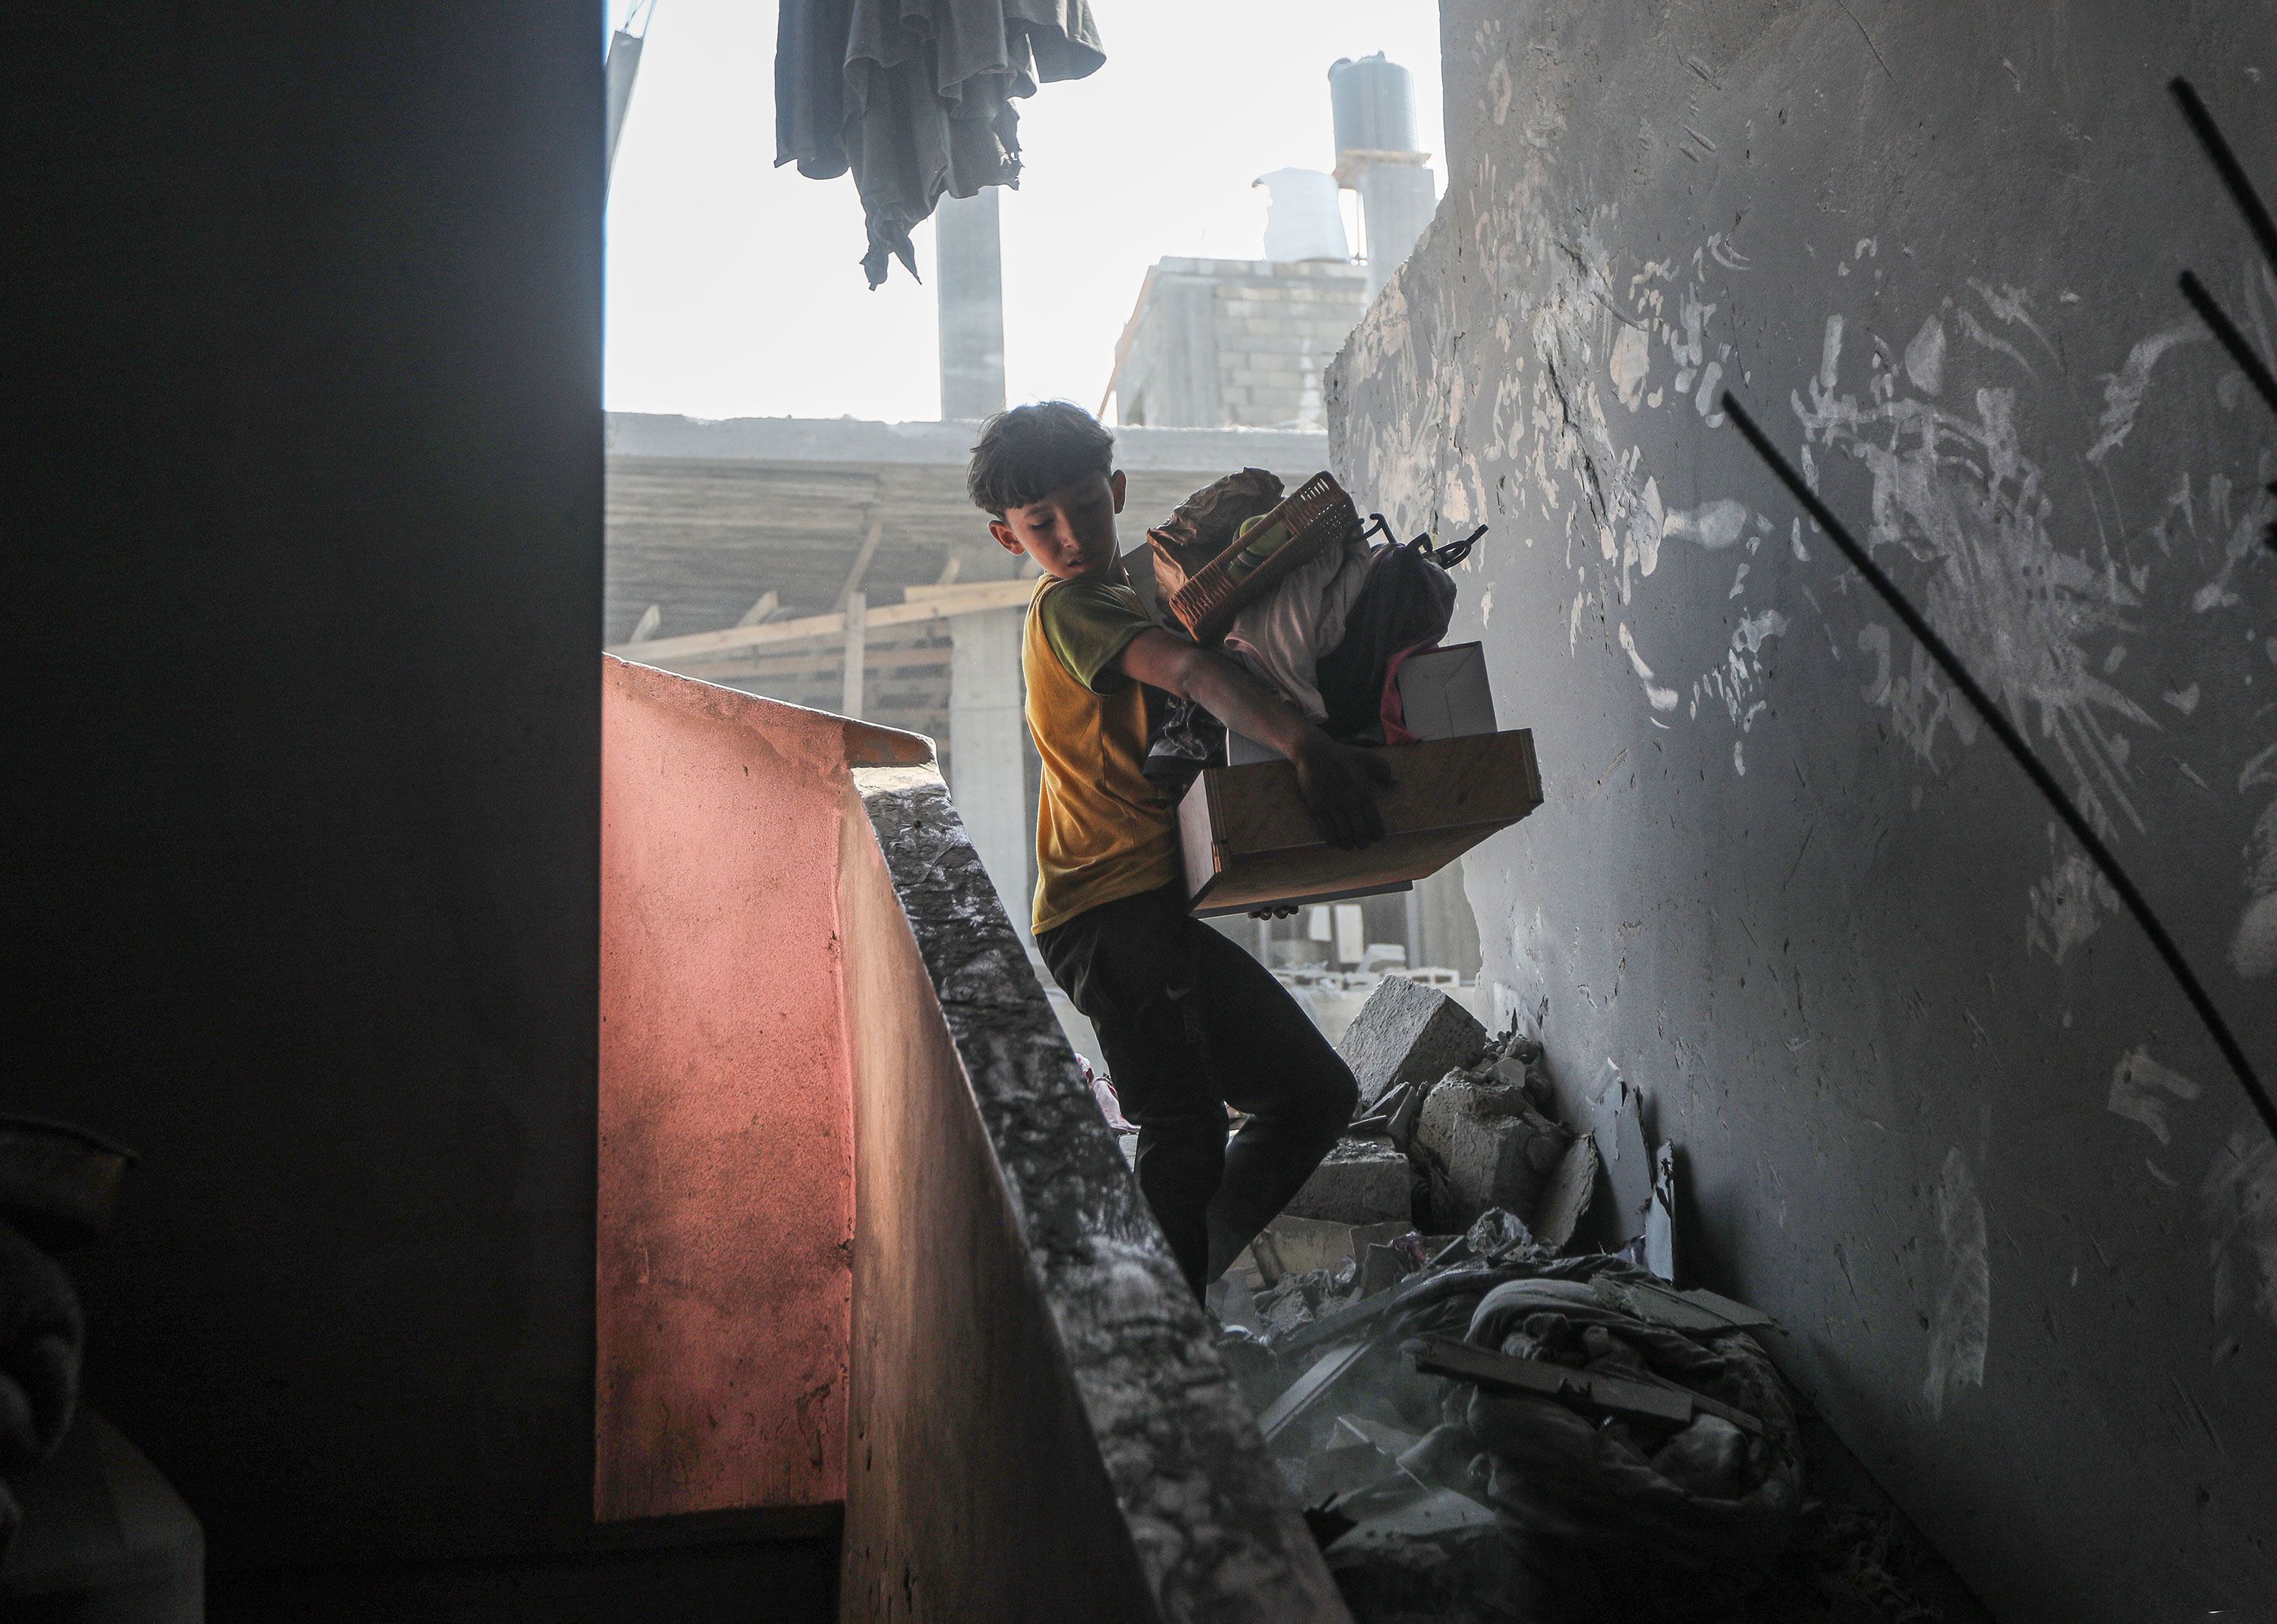 A boy carries salvaged belongings from the wreckage of his family's home in Khan Younis, Gaza, on October 11.